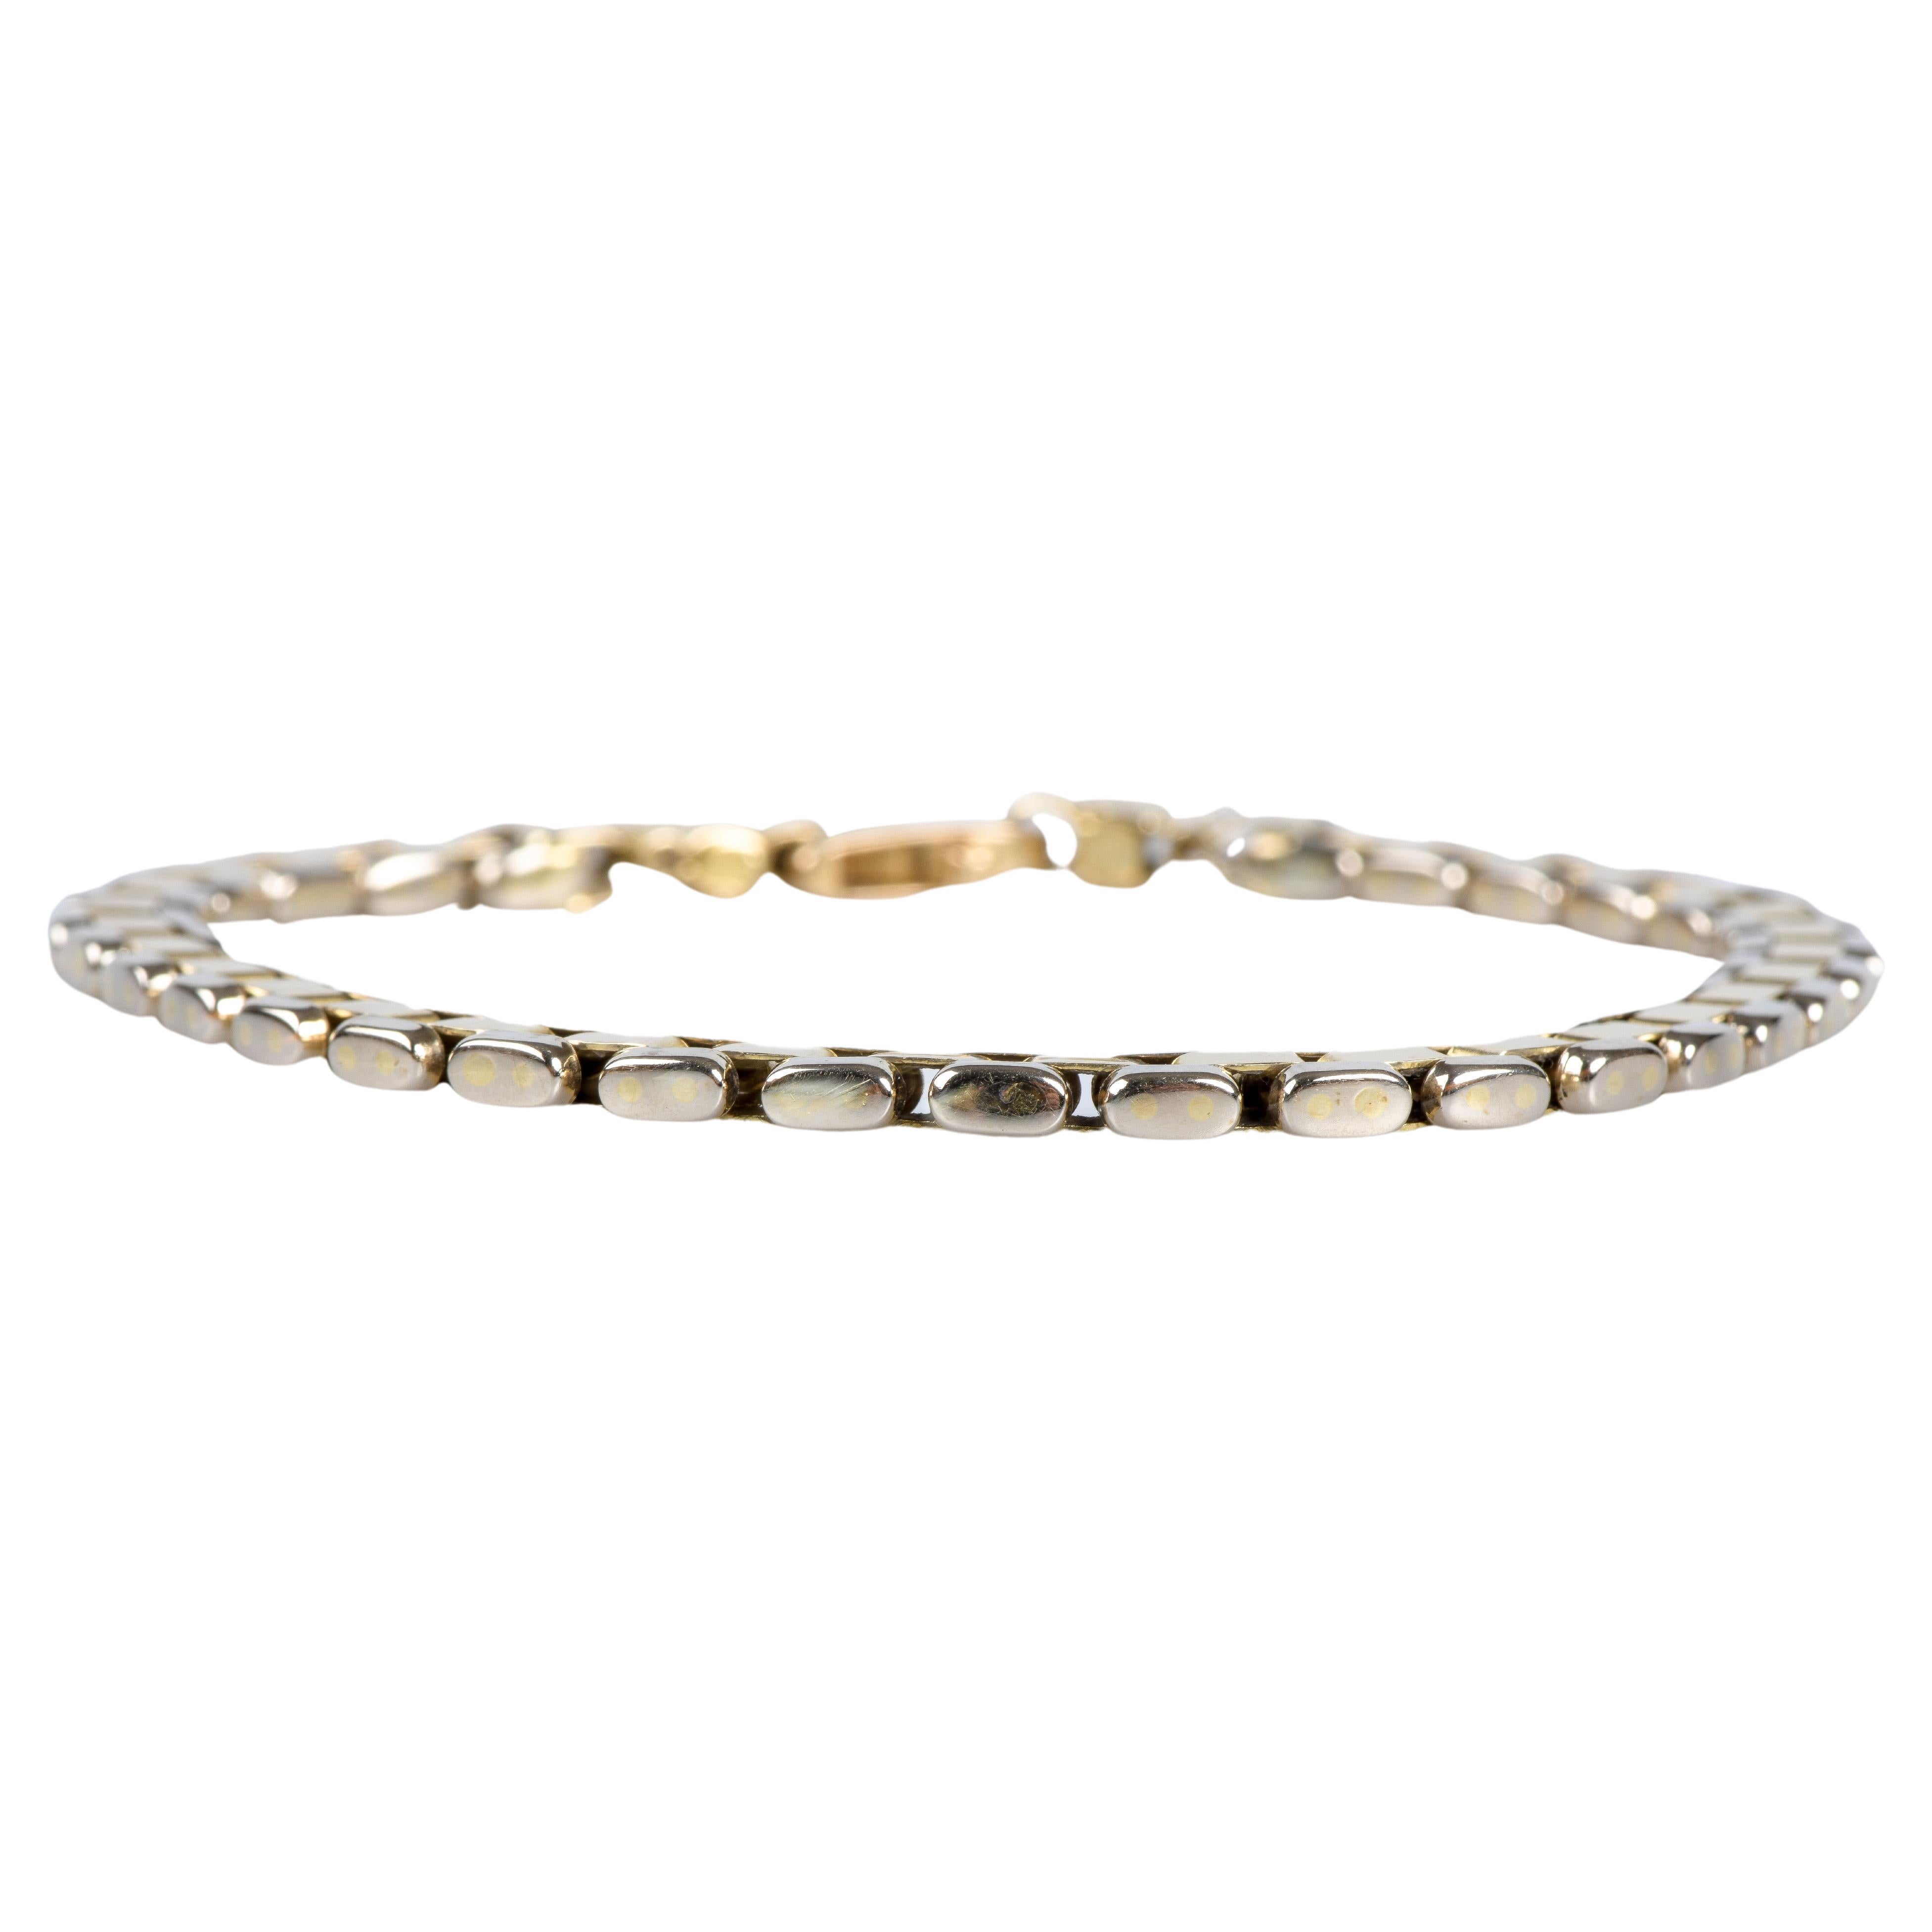 Men’s bracelet in soft 18K yellow and white bicolor gold mesh.  For Sale